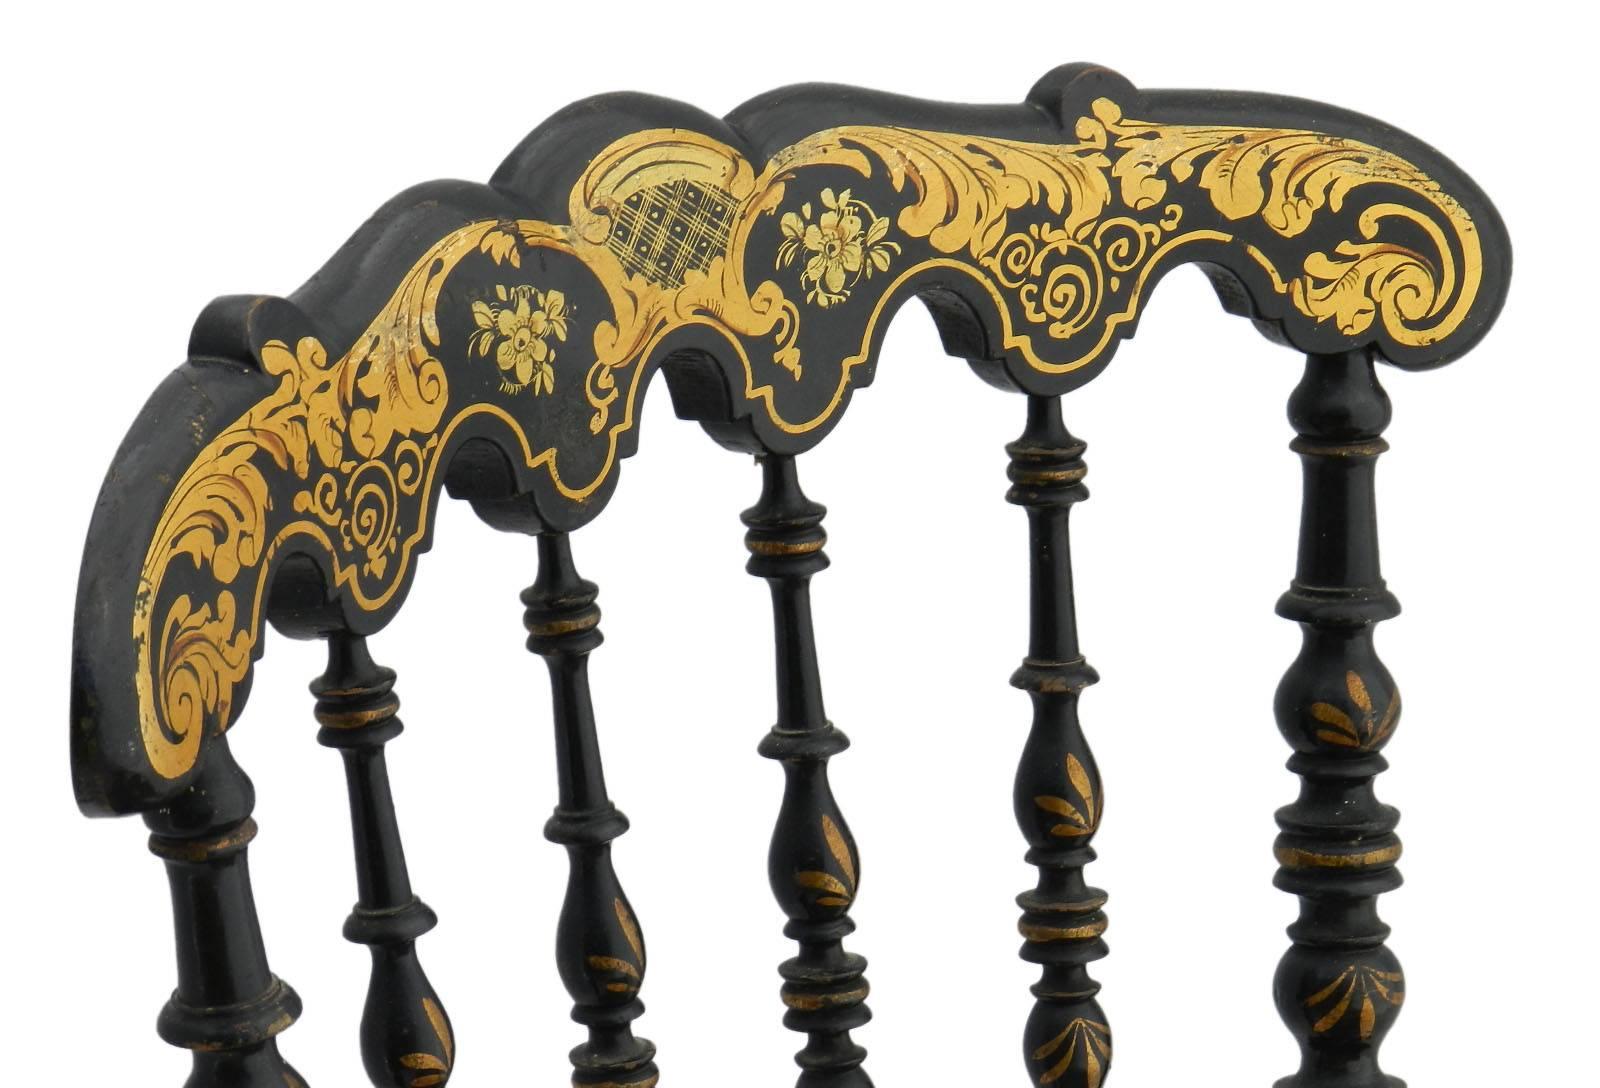 Superb original French Napoleon III chair black and gold
chinoiserie Chiavari
Button tufted original fabric upholstered seat gloriously distressed by age with slight fraying easy to replace if preferred
Absolutely charming !
Seat height 44